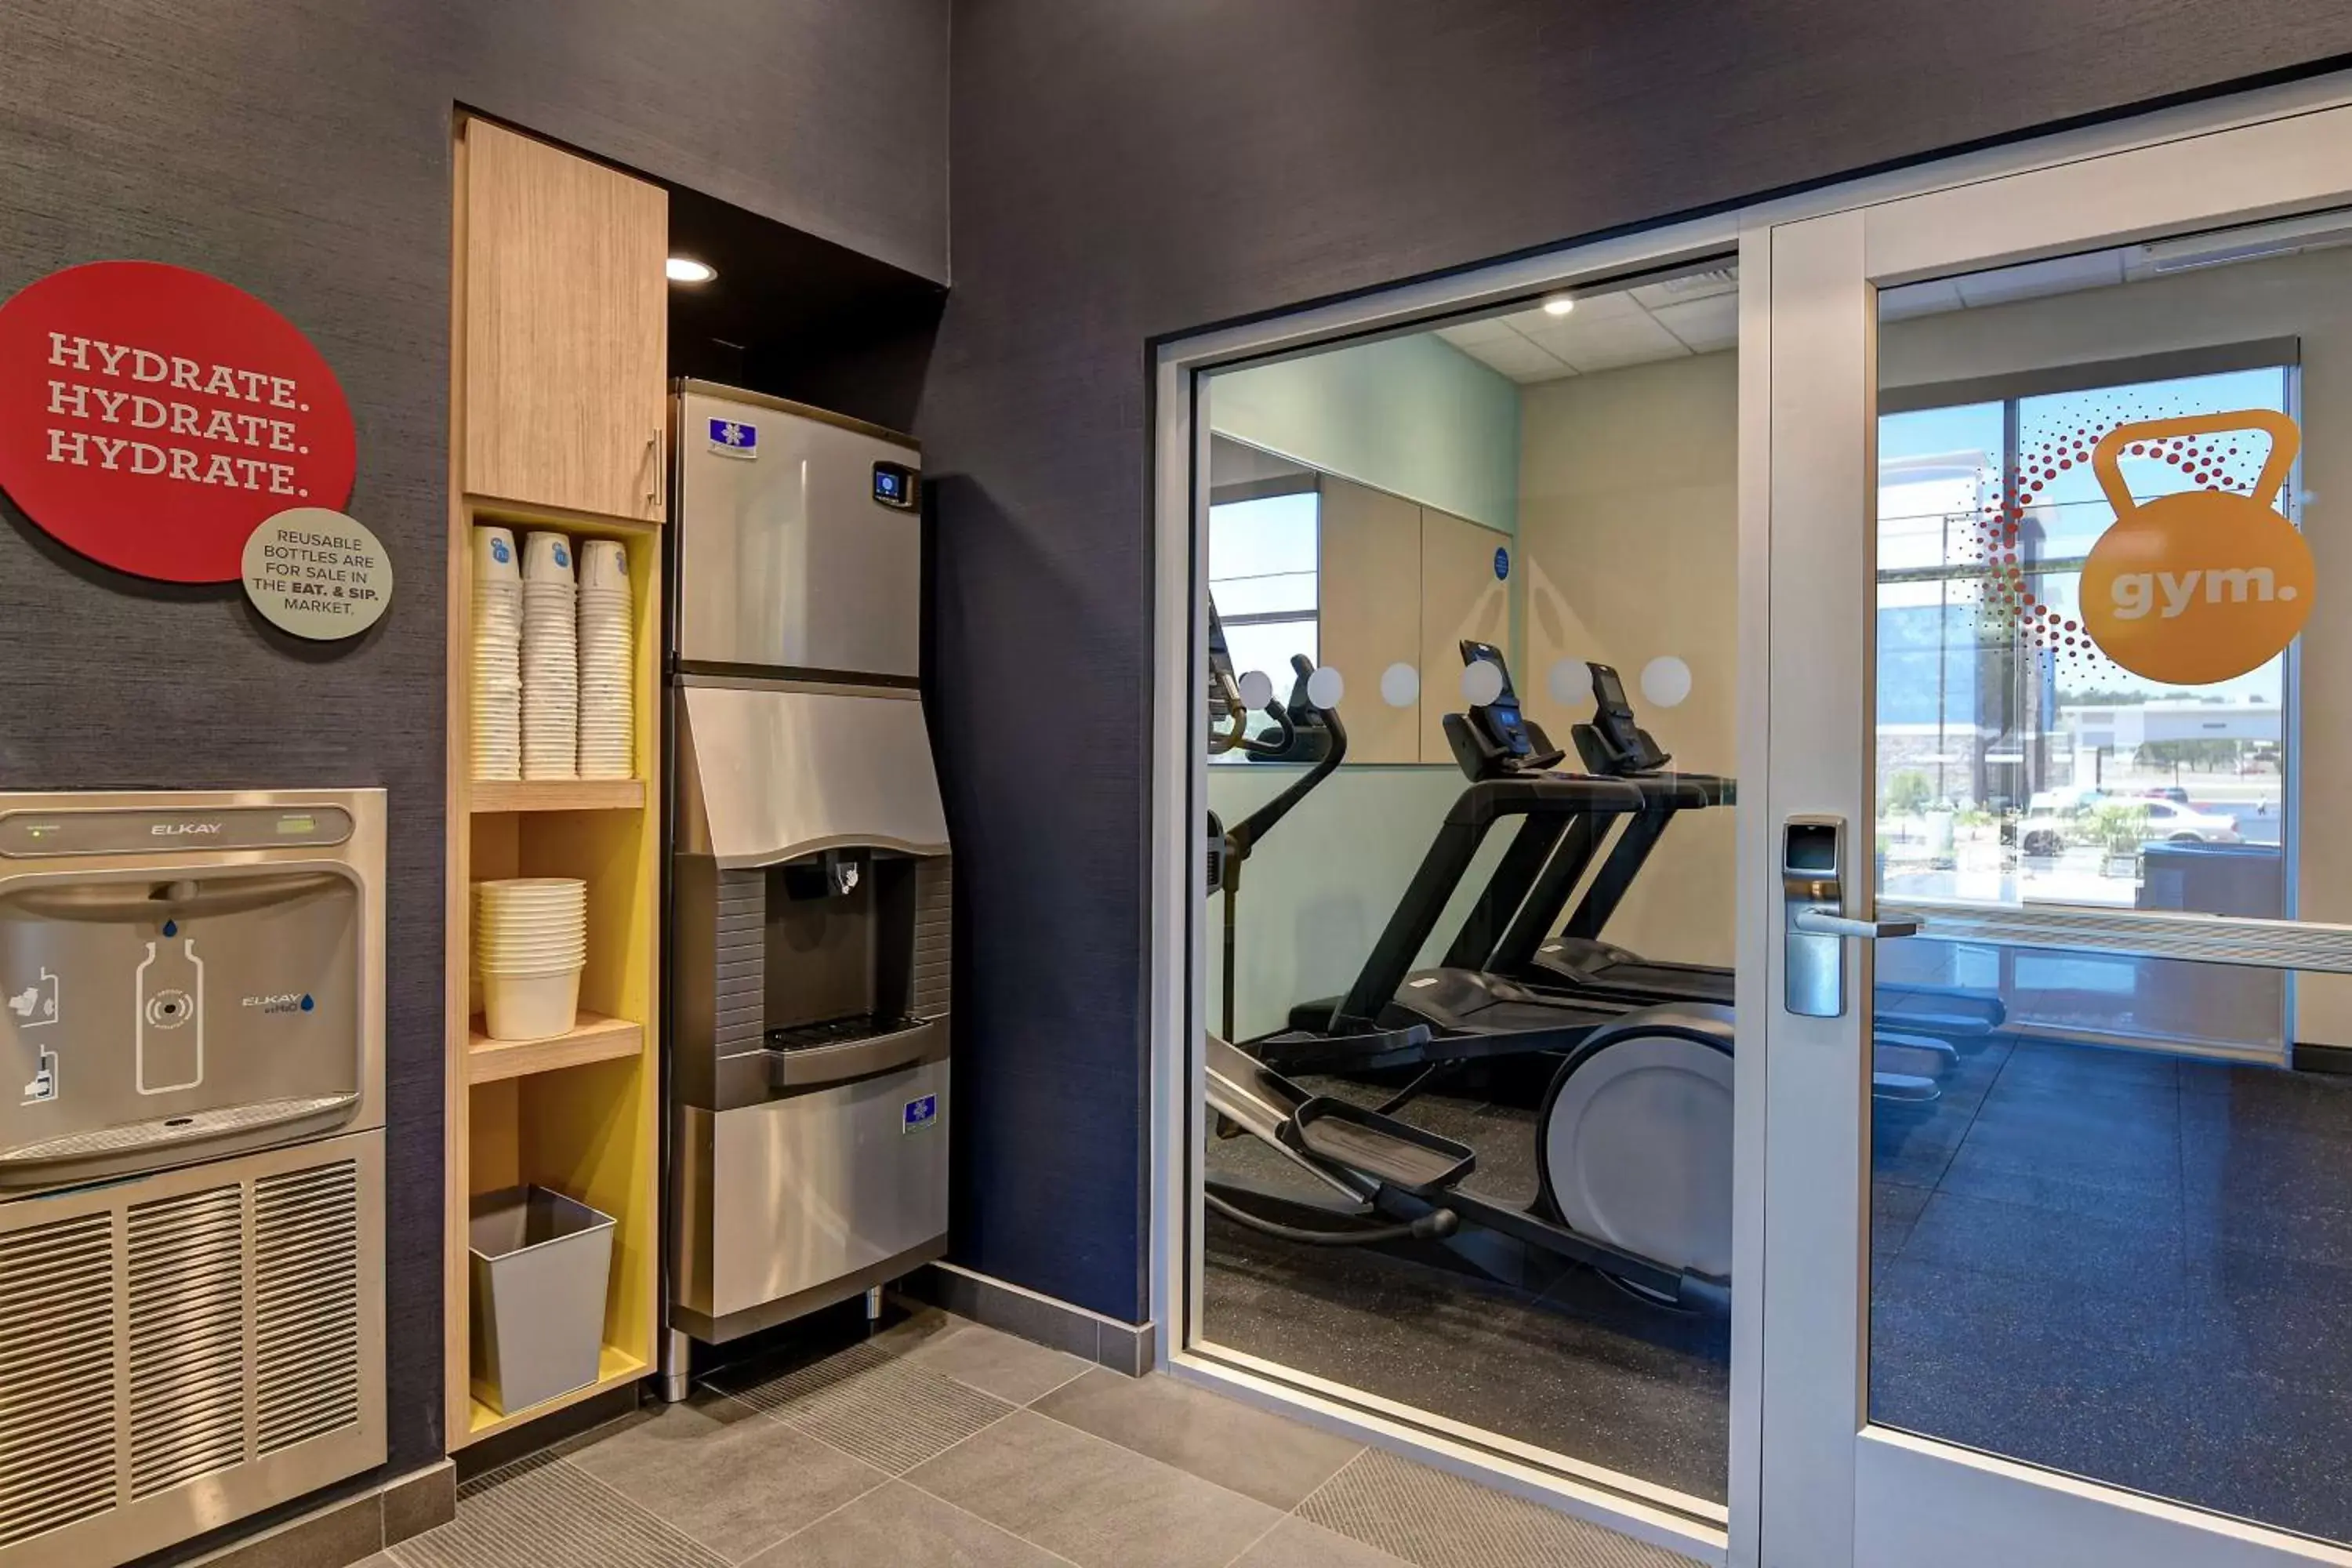 Fitness centre/facilities in Tru By Hilton Rocky Mount, Nc